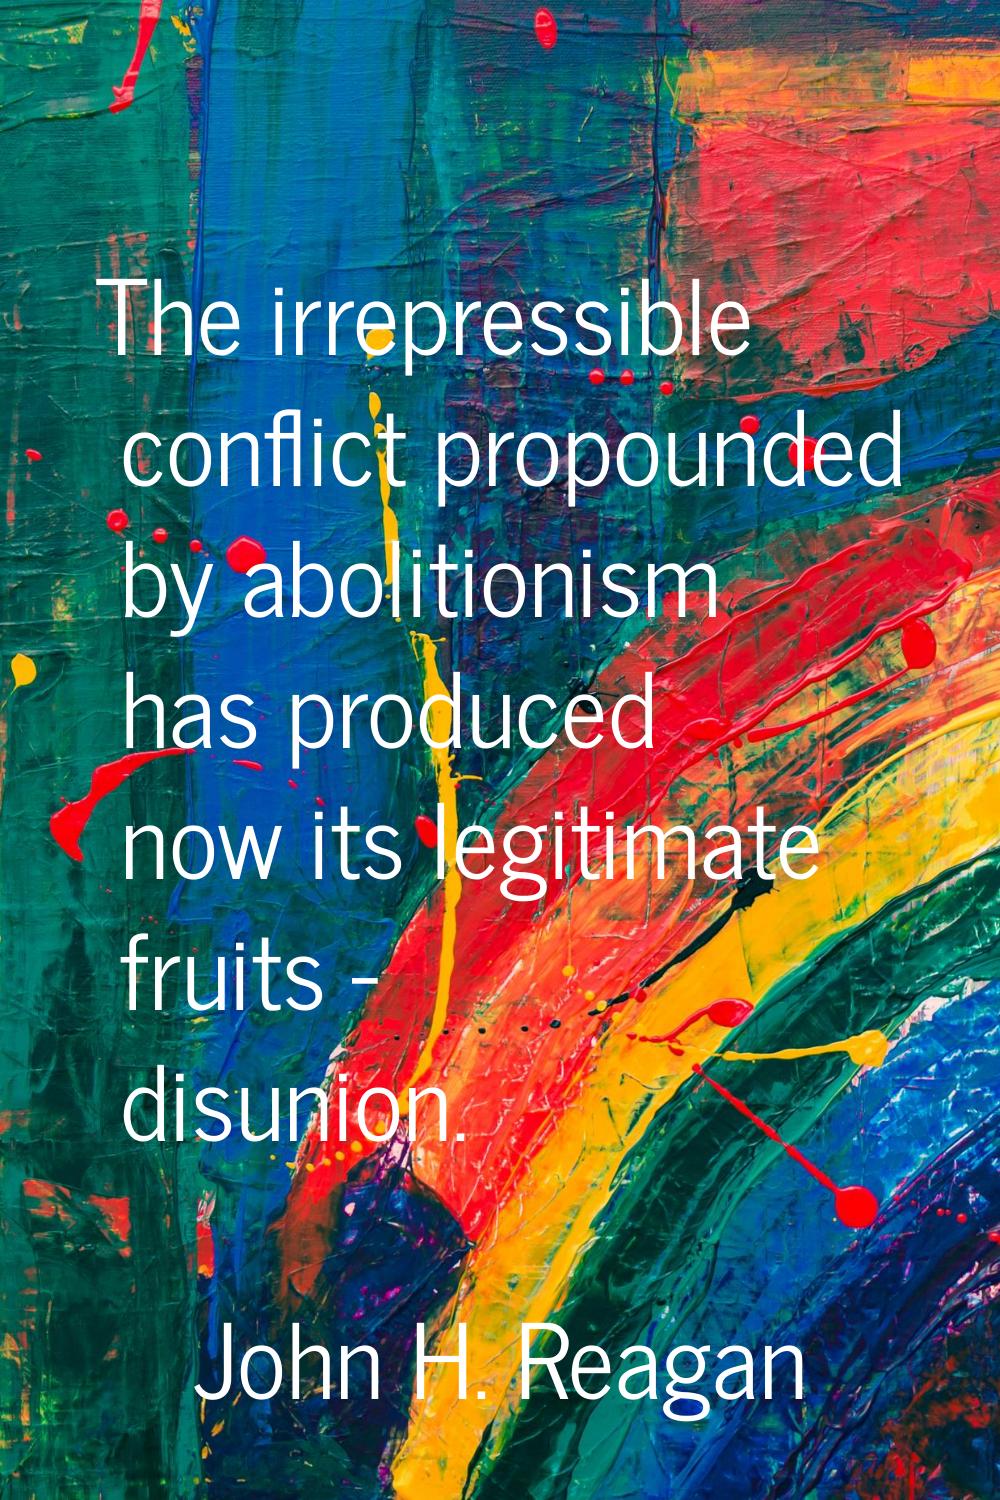 The irrepressible conflict propounded by abolitionism has produced now its legitimate fruits - disu